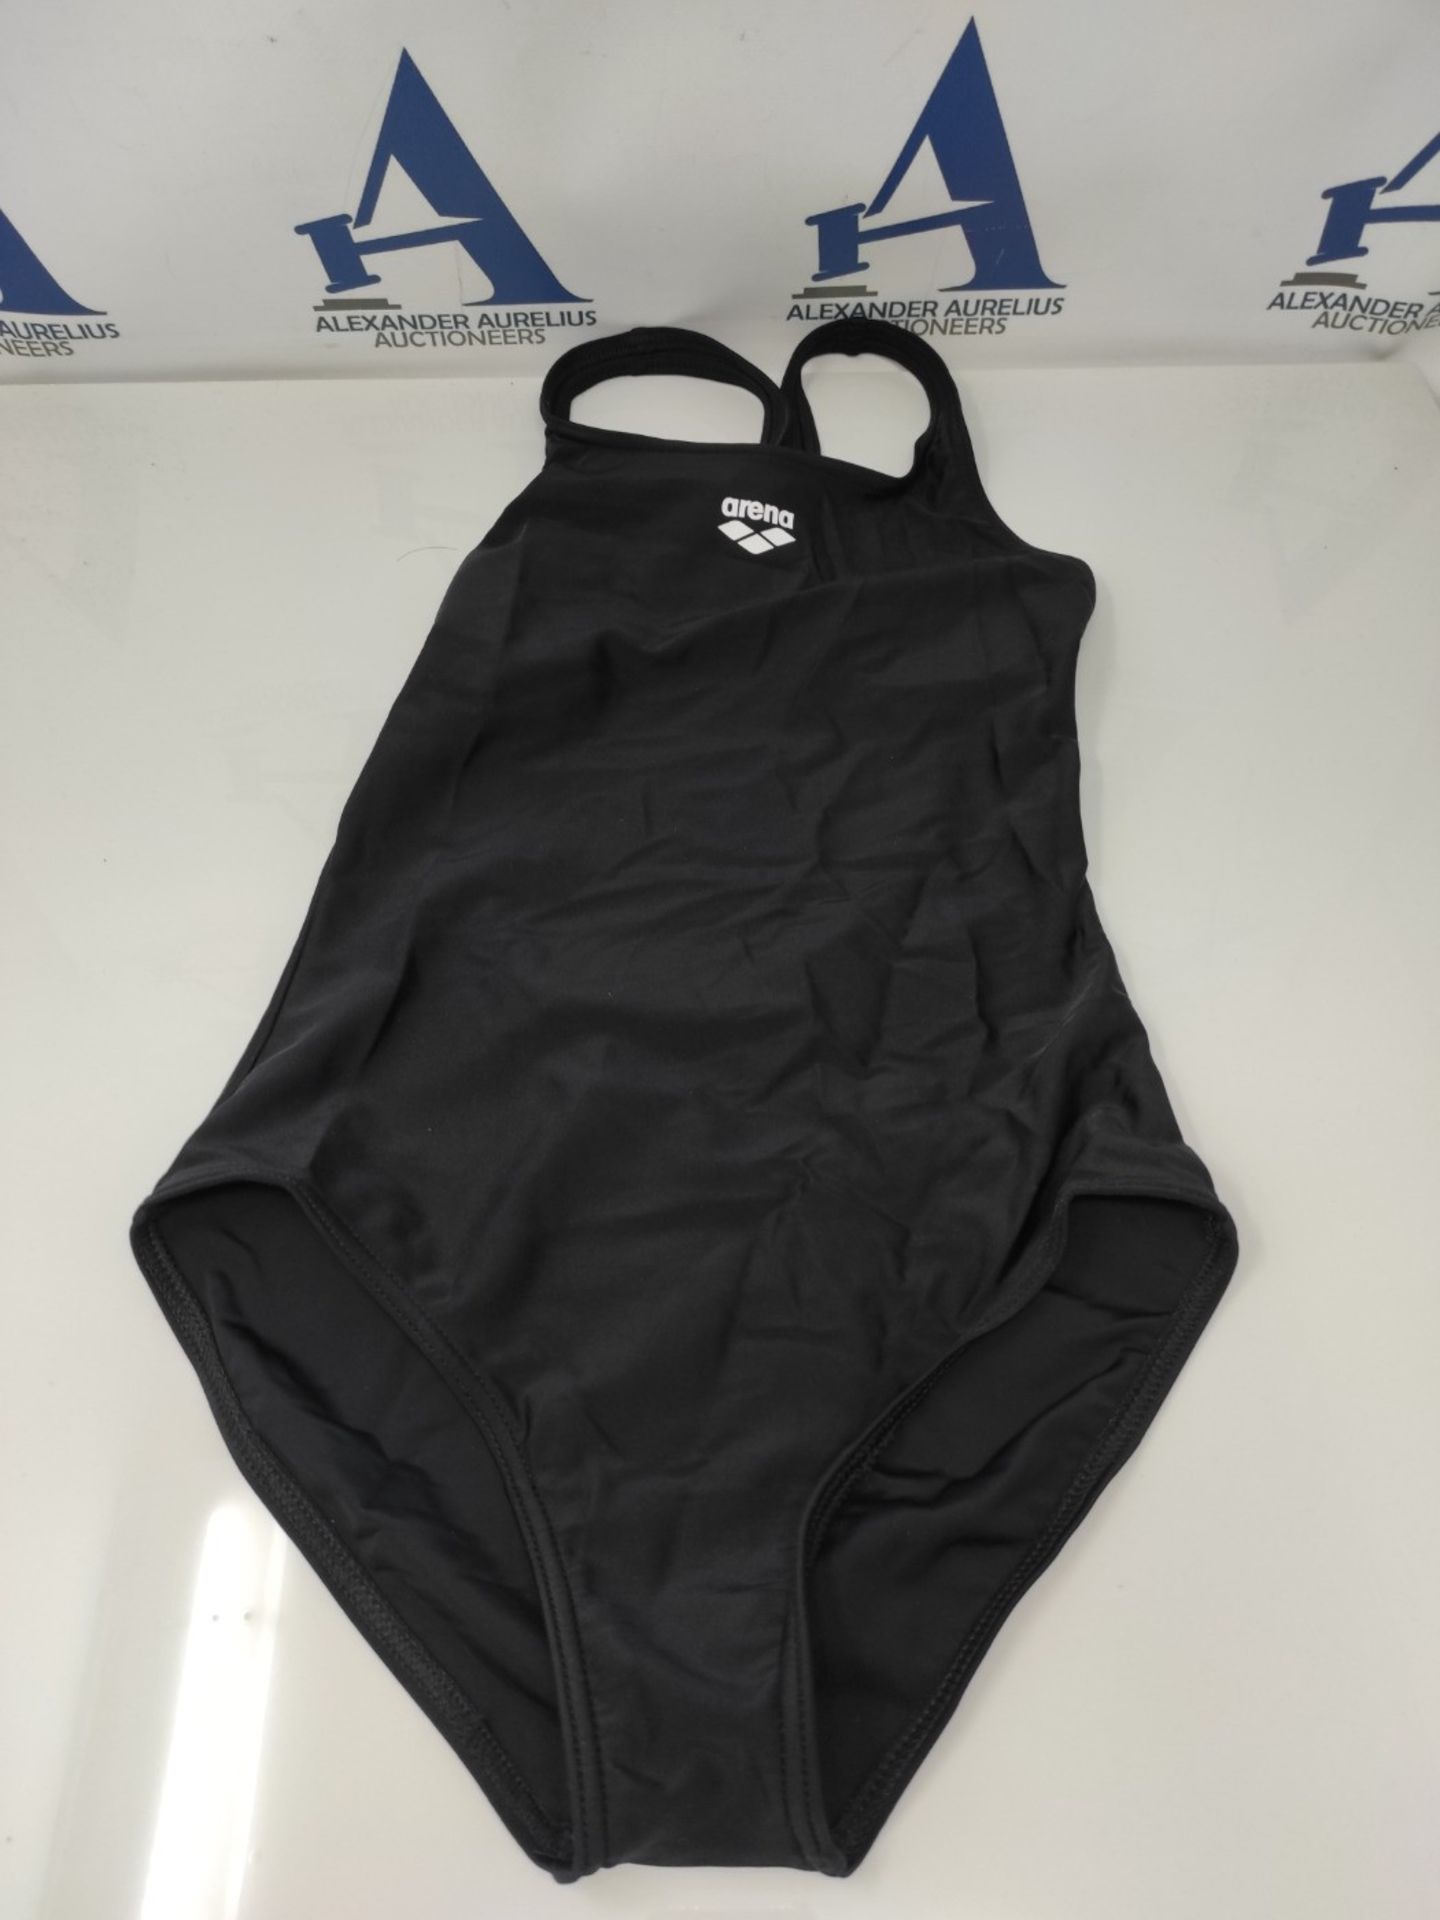 arena Dynamo Junior R Girl's One-piece Swimsuit, Sports Swimsuit in Chlorine and Salt - Image 2 of 2